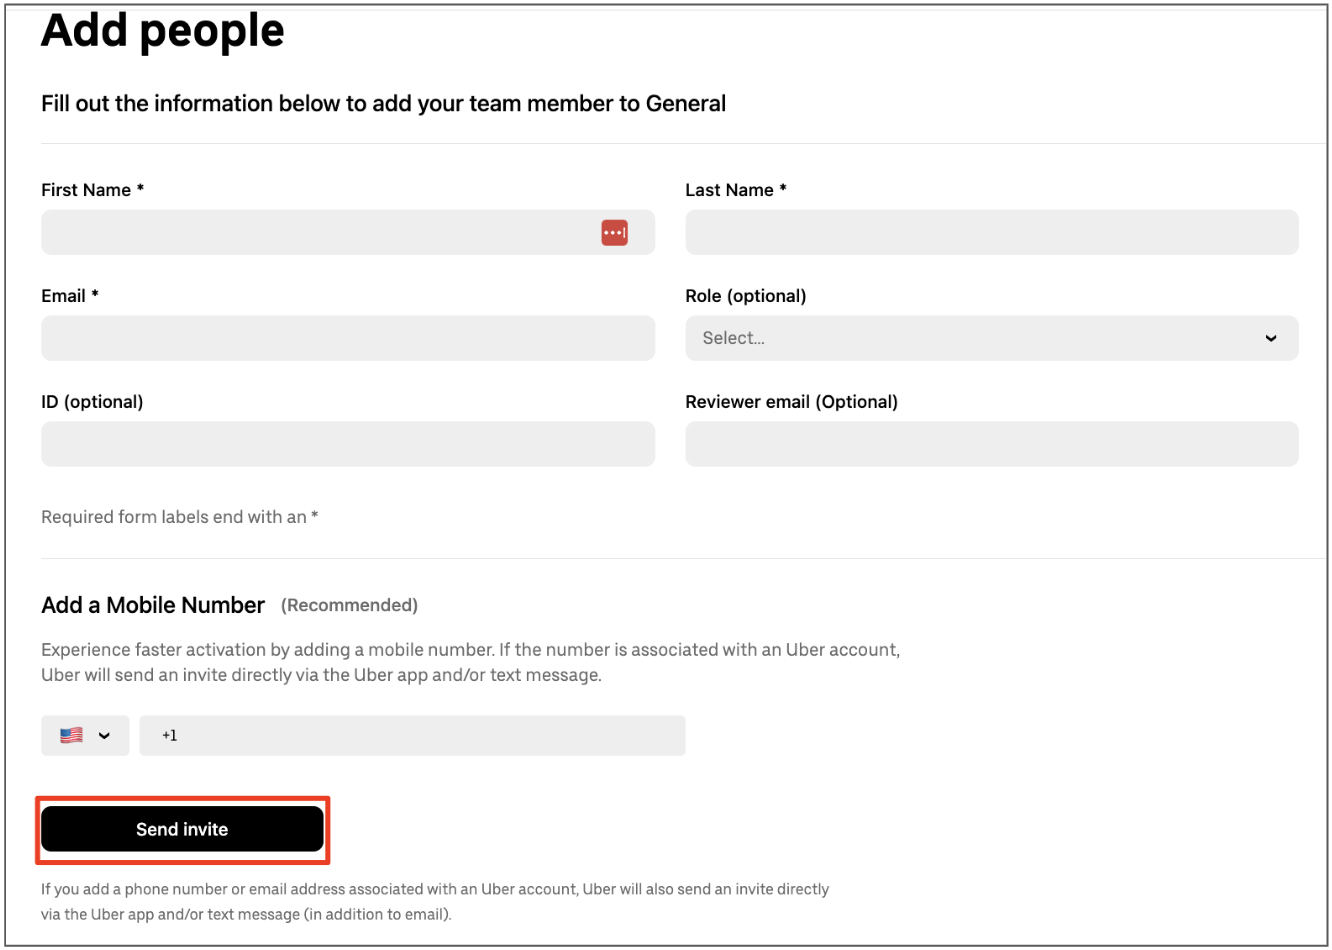 Screenshot of add people interface with the send invite button highlighted